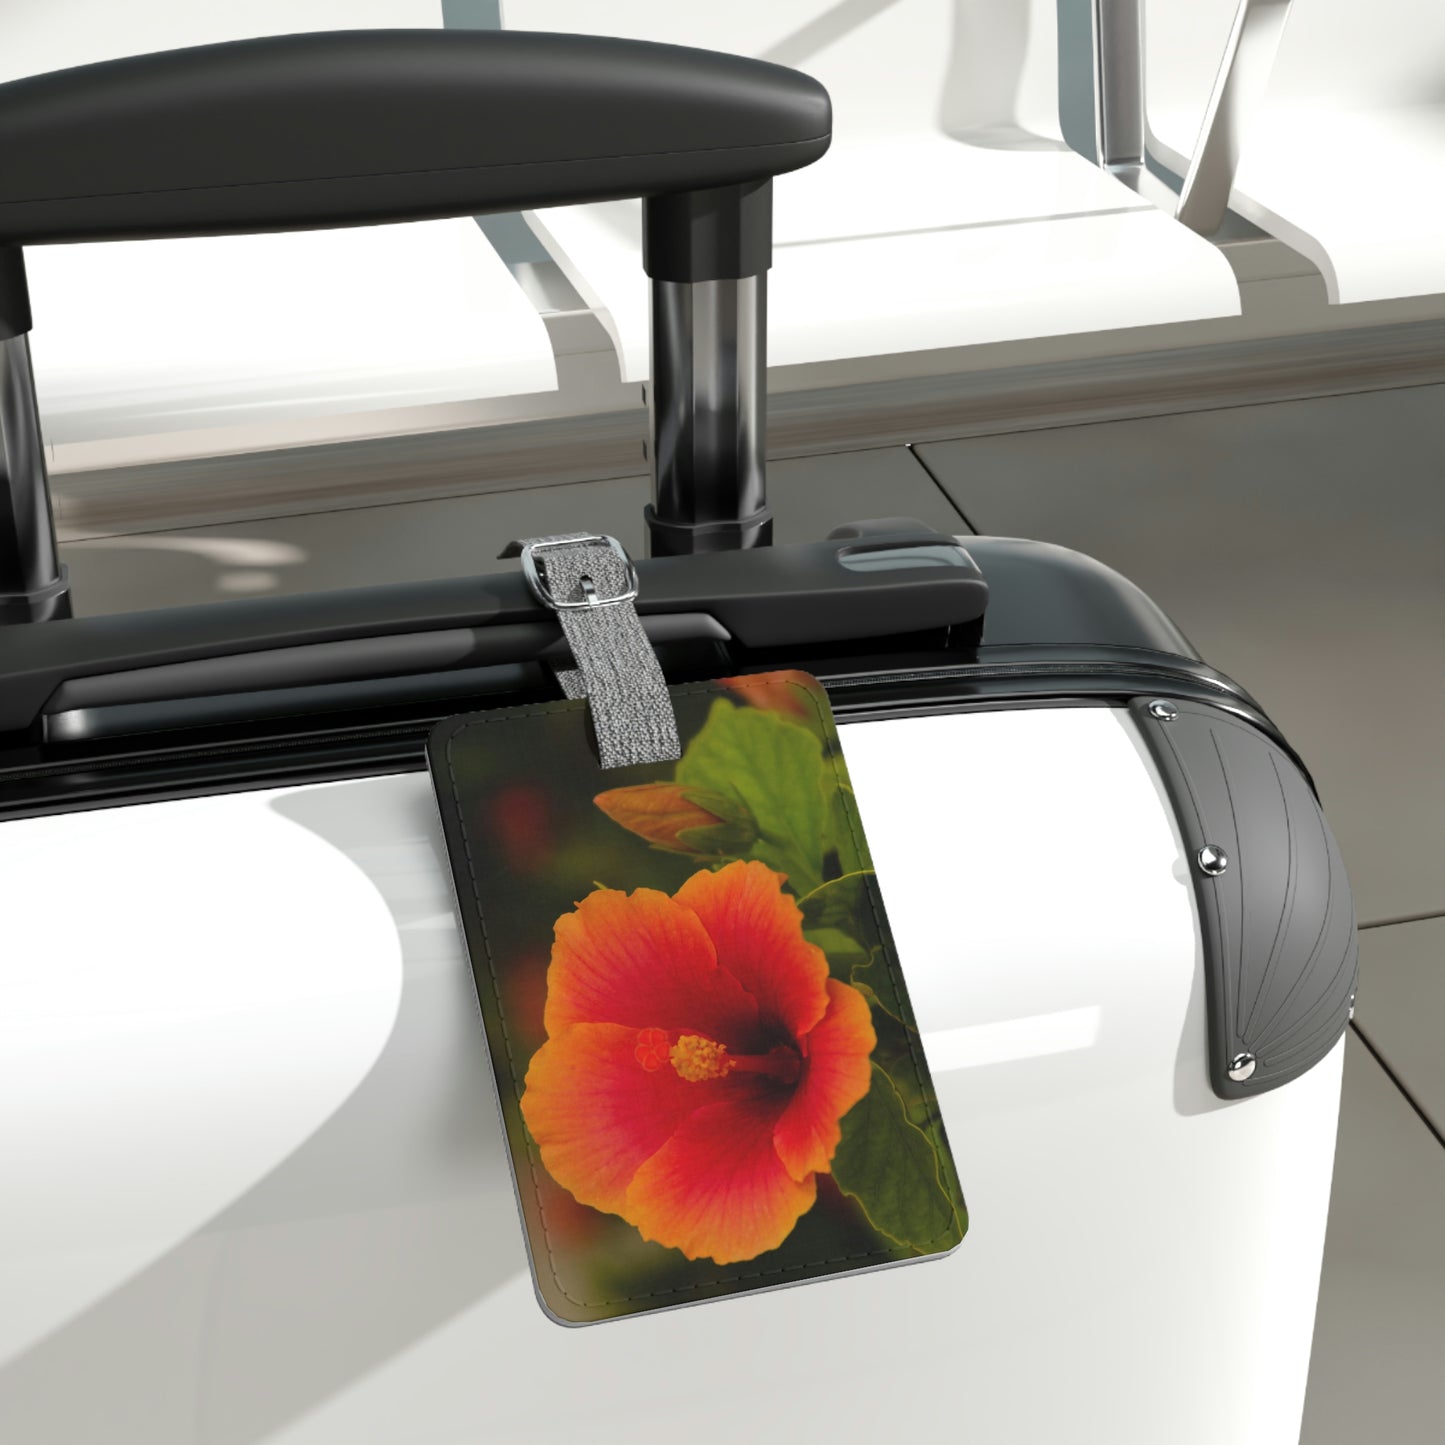 Flowers 31 Saffiano Polyester Luggage Tag, Rectangle